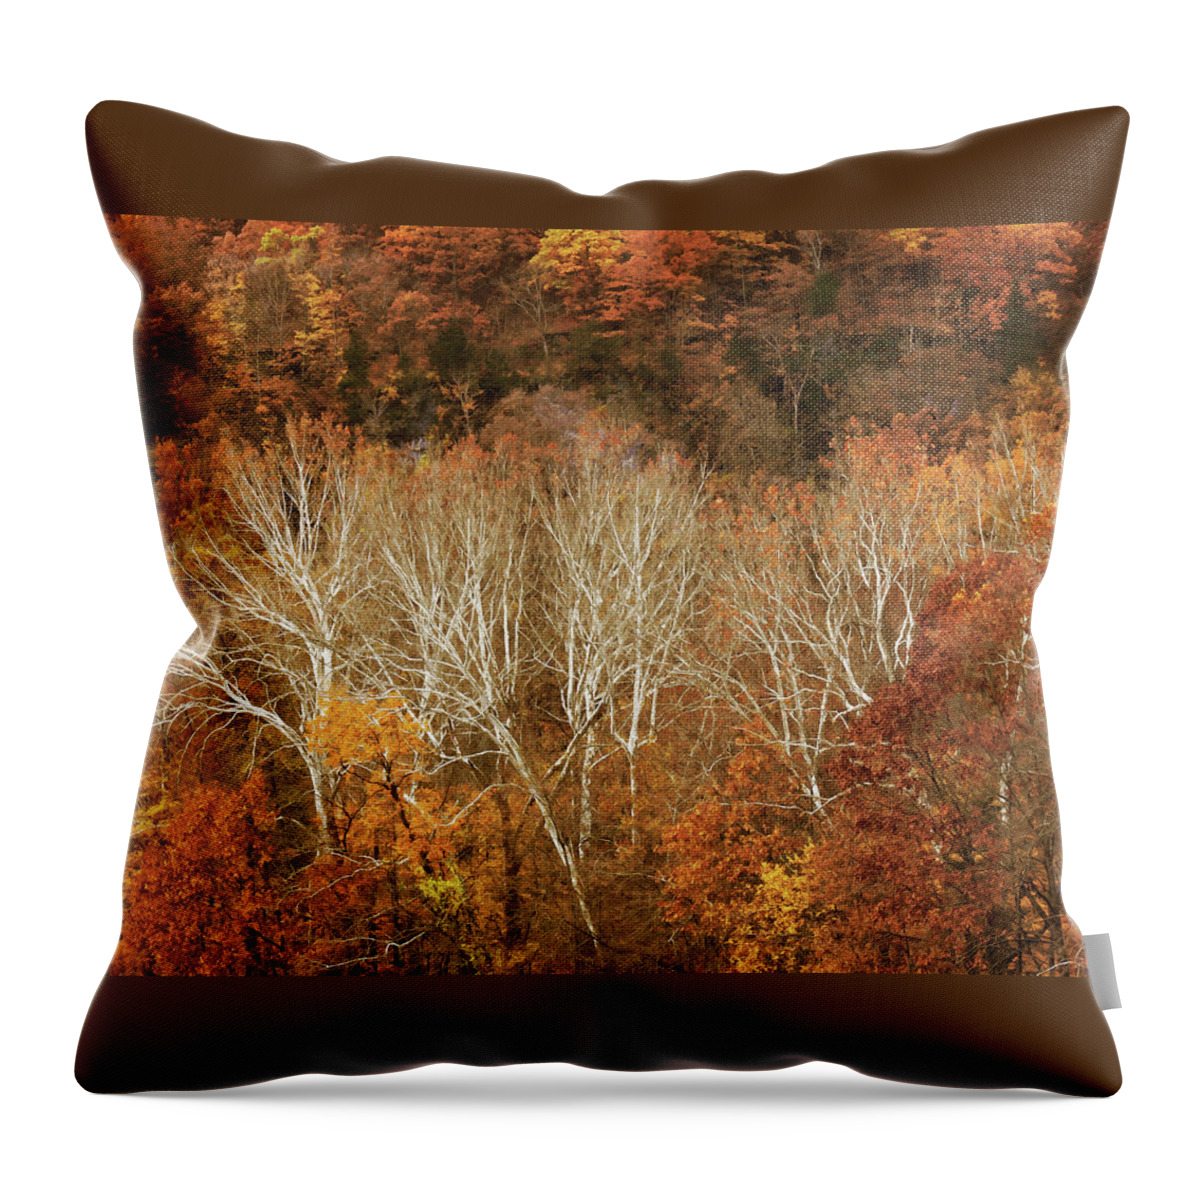 Hill Throw Pillow featuring the photograph The Hills in Autumn by Mitch Spence